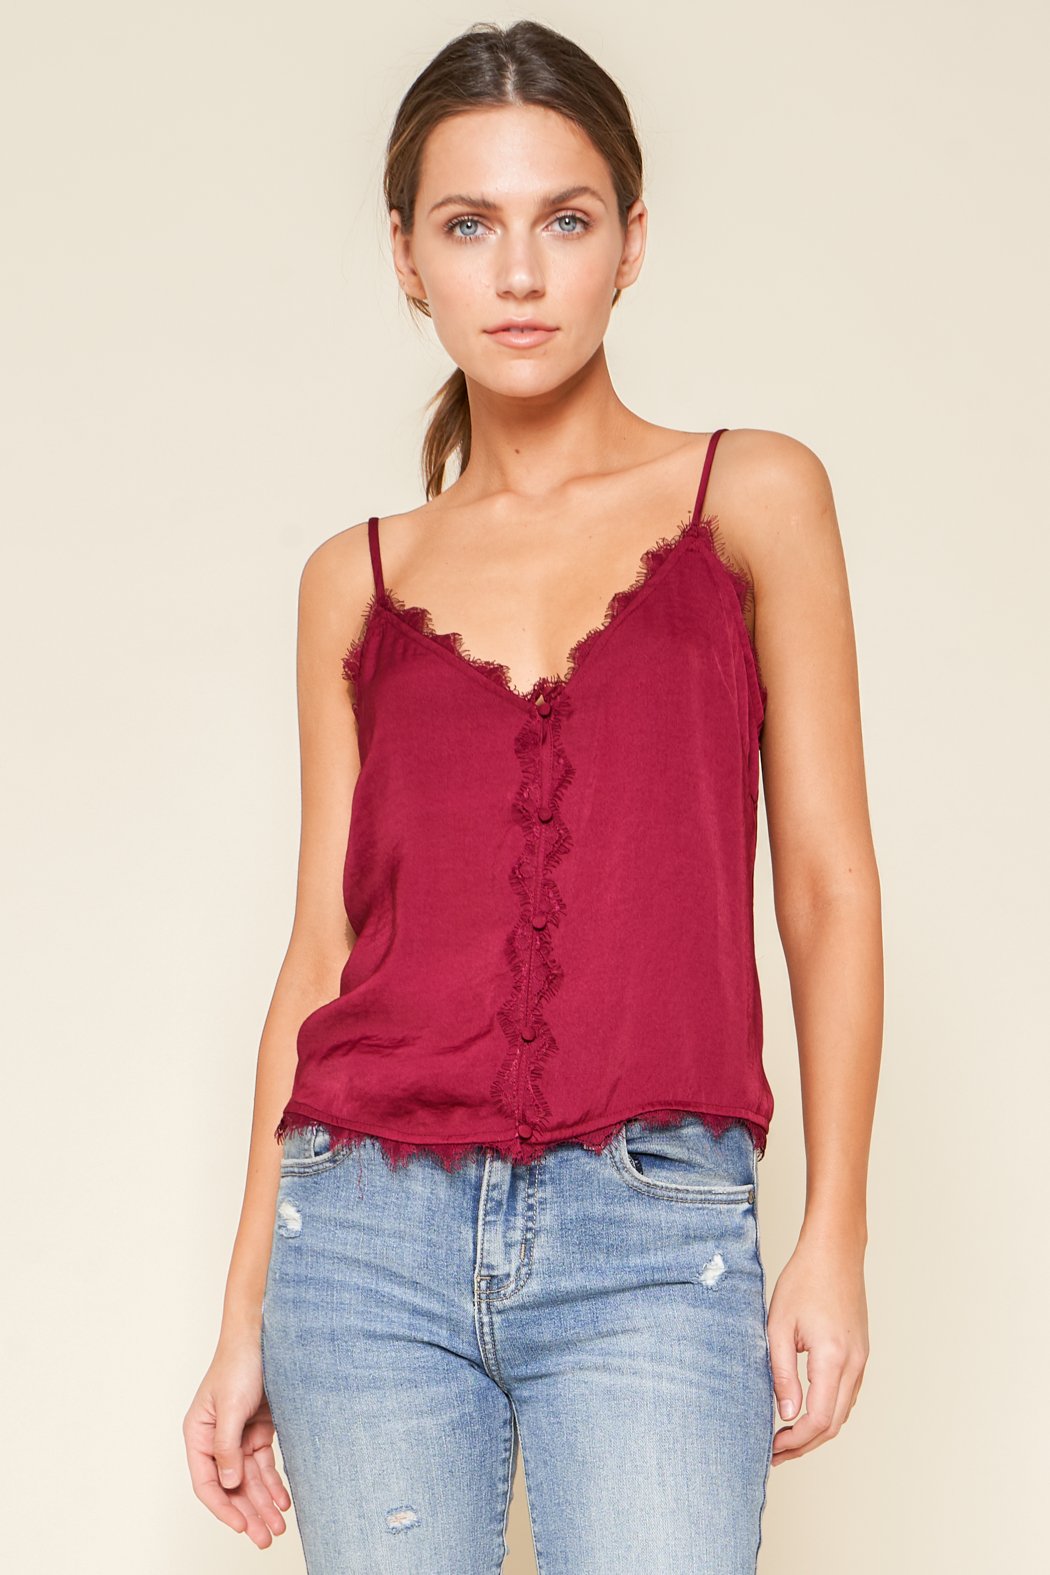 Review Burgundy Lace Trimmed Camisole Top Size 8 – SwapUp